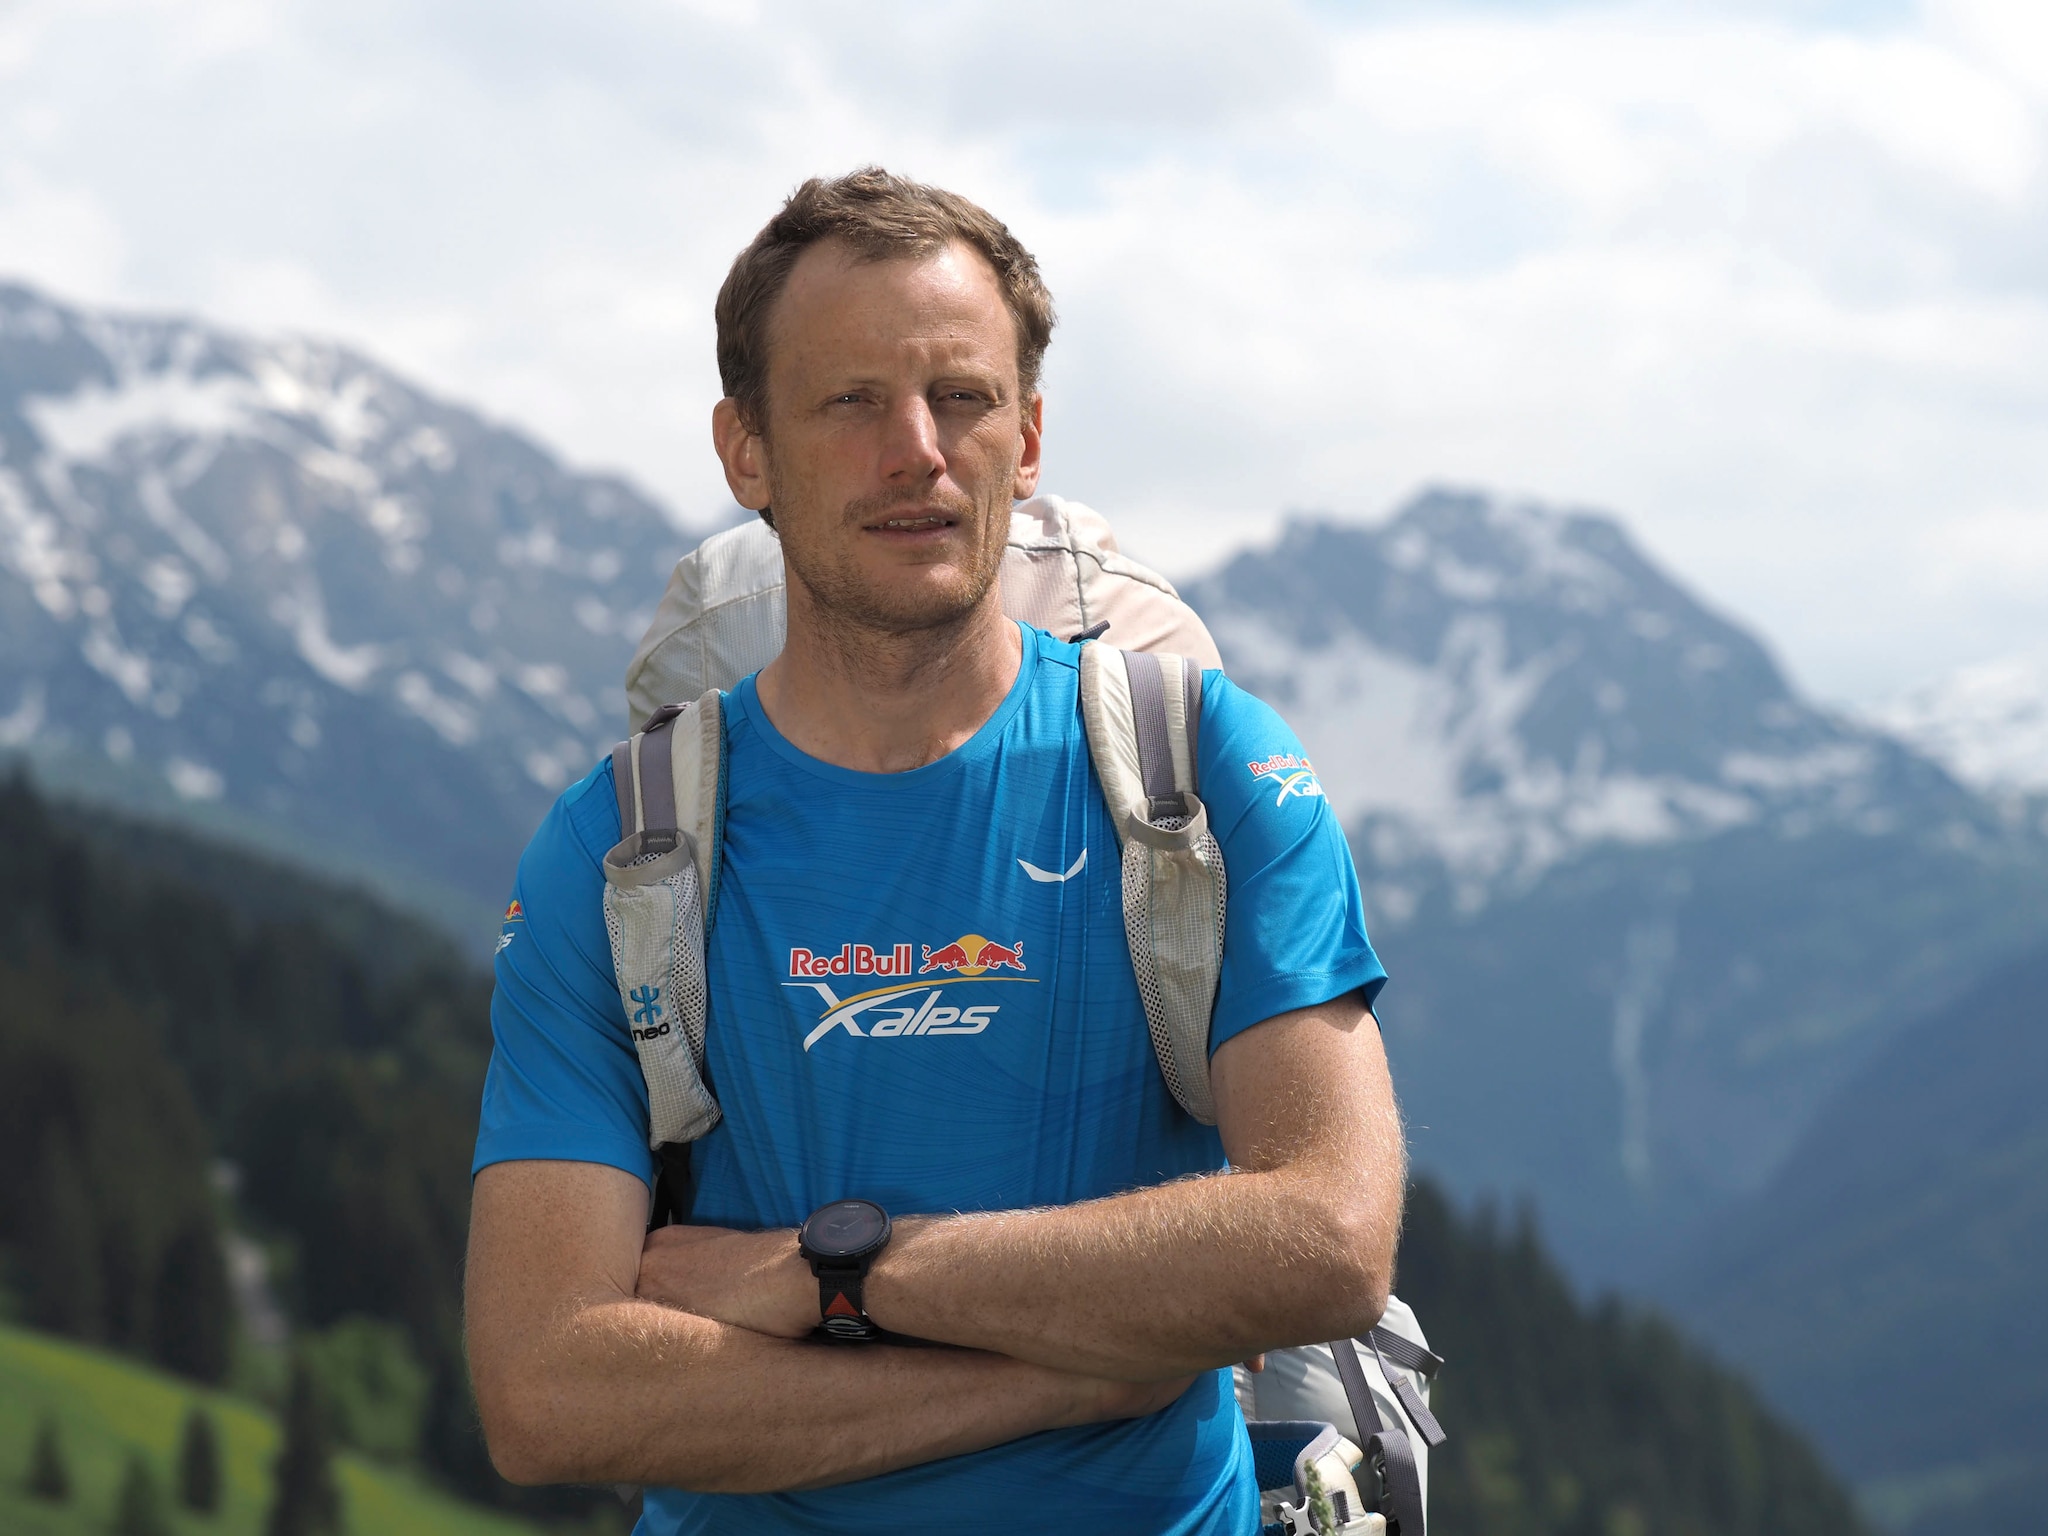 Nick Neynens (NZL) poses for portrait during Red Bull X-Alps 2021 preparations in Wagrain, Austria on August 12, 2021